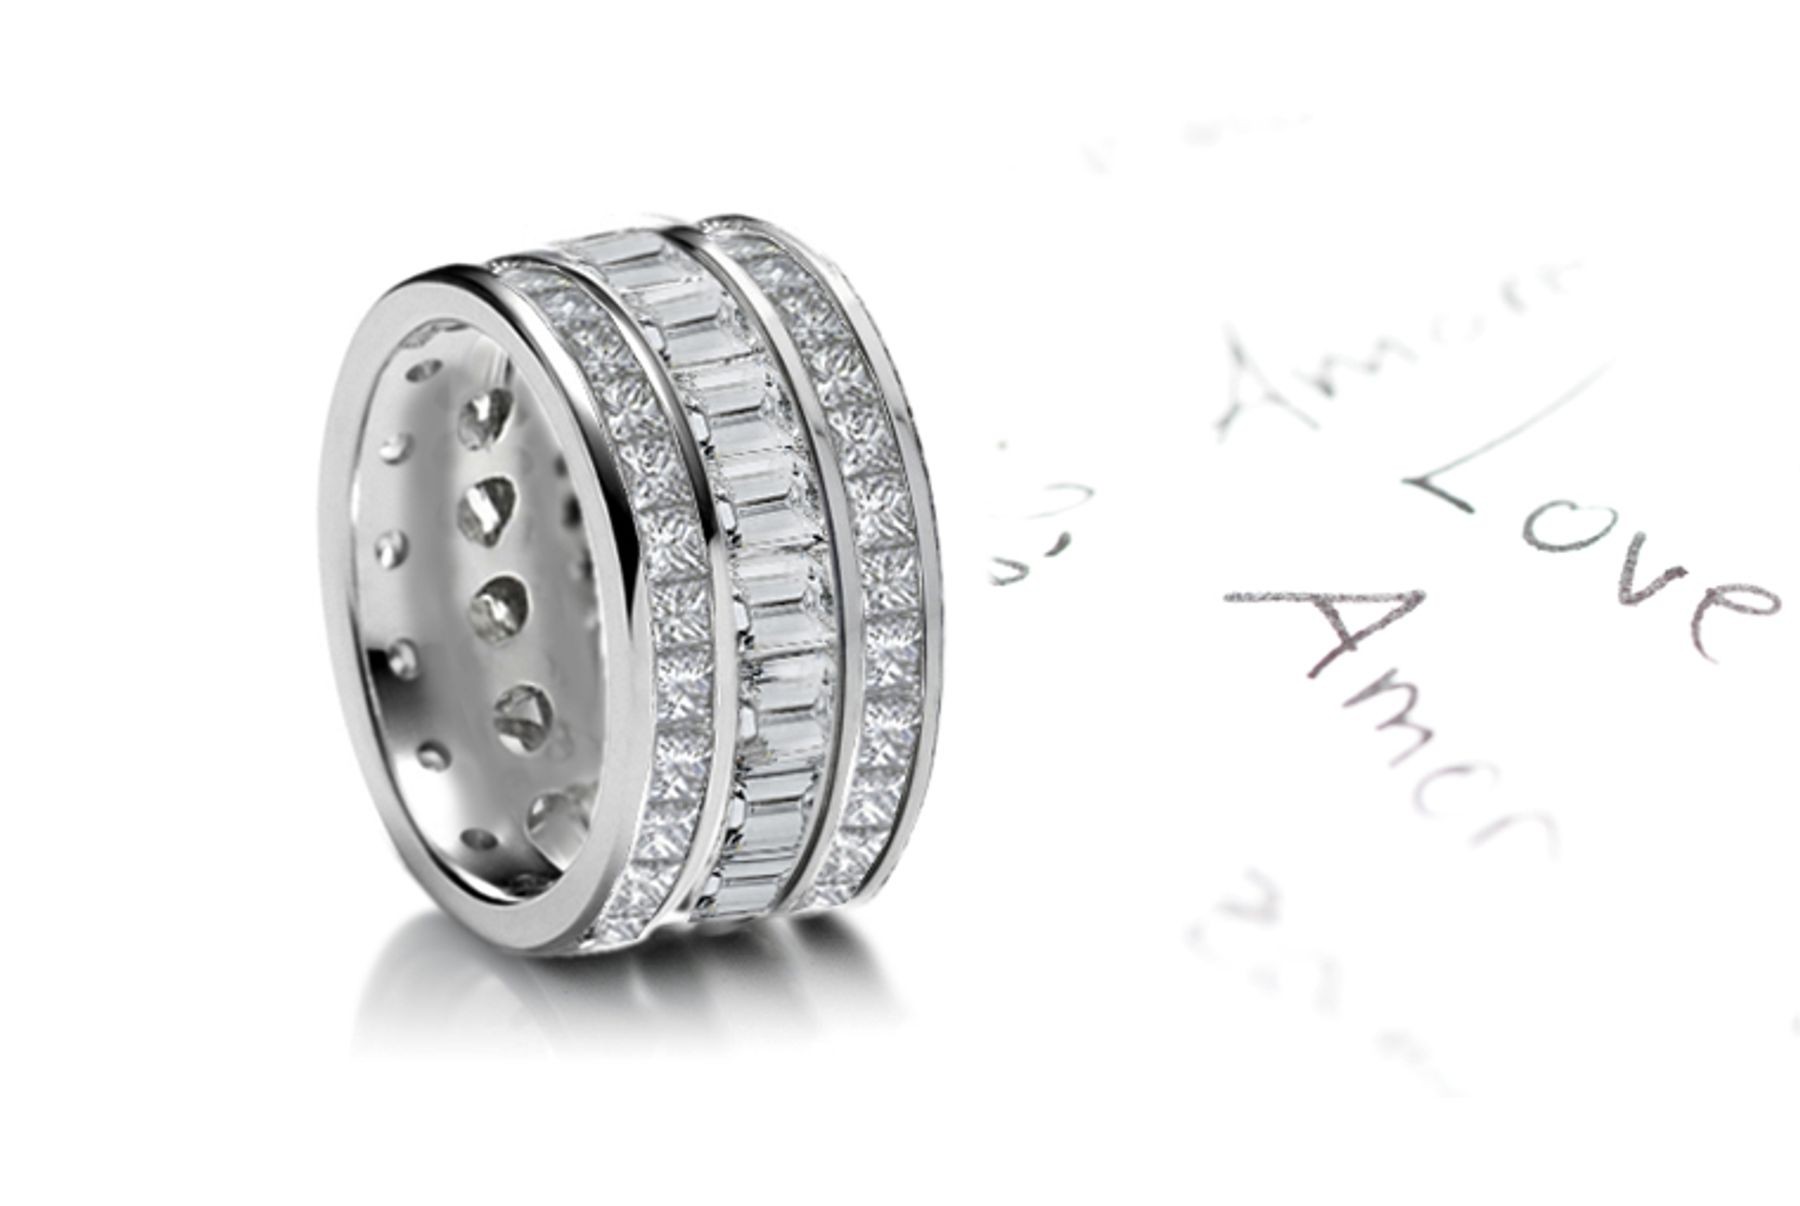 Tailor Designed Sparkler of Baguette Cut Diamonds bordered by row of Round Diamonds Sprinkled Sides in 4.0 to 5.50 carats